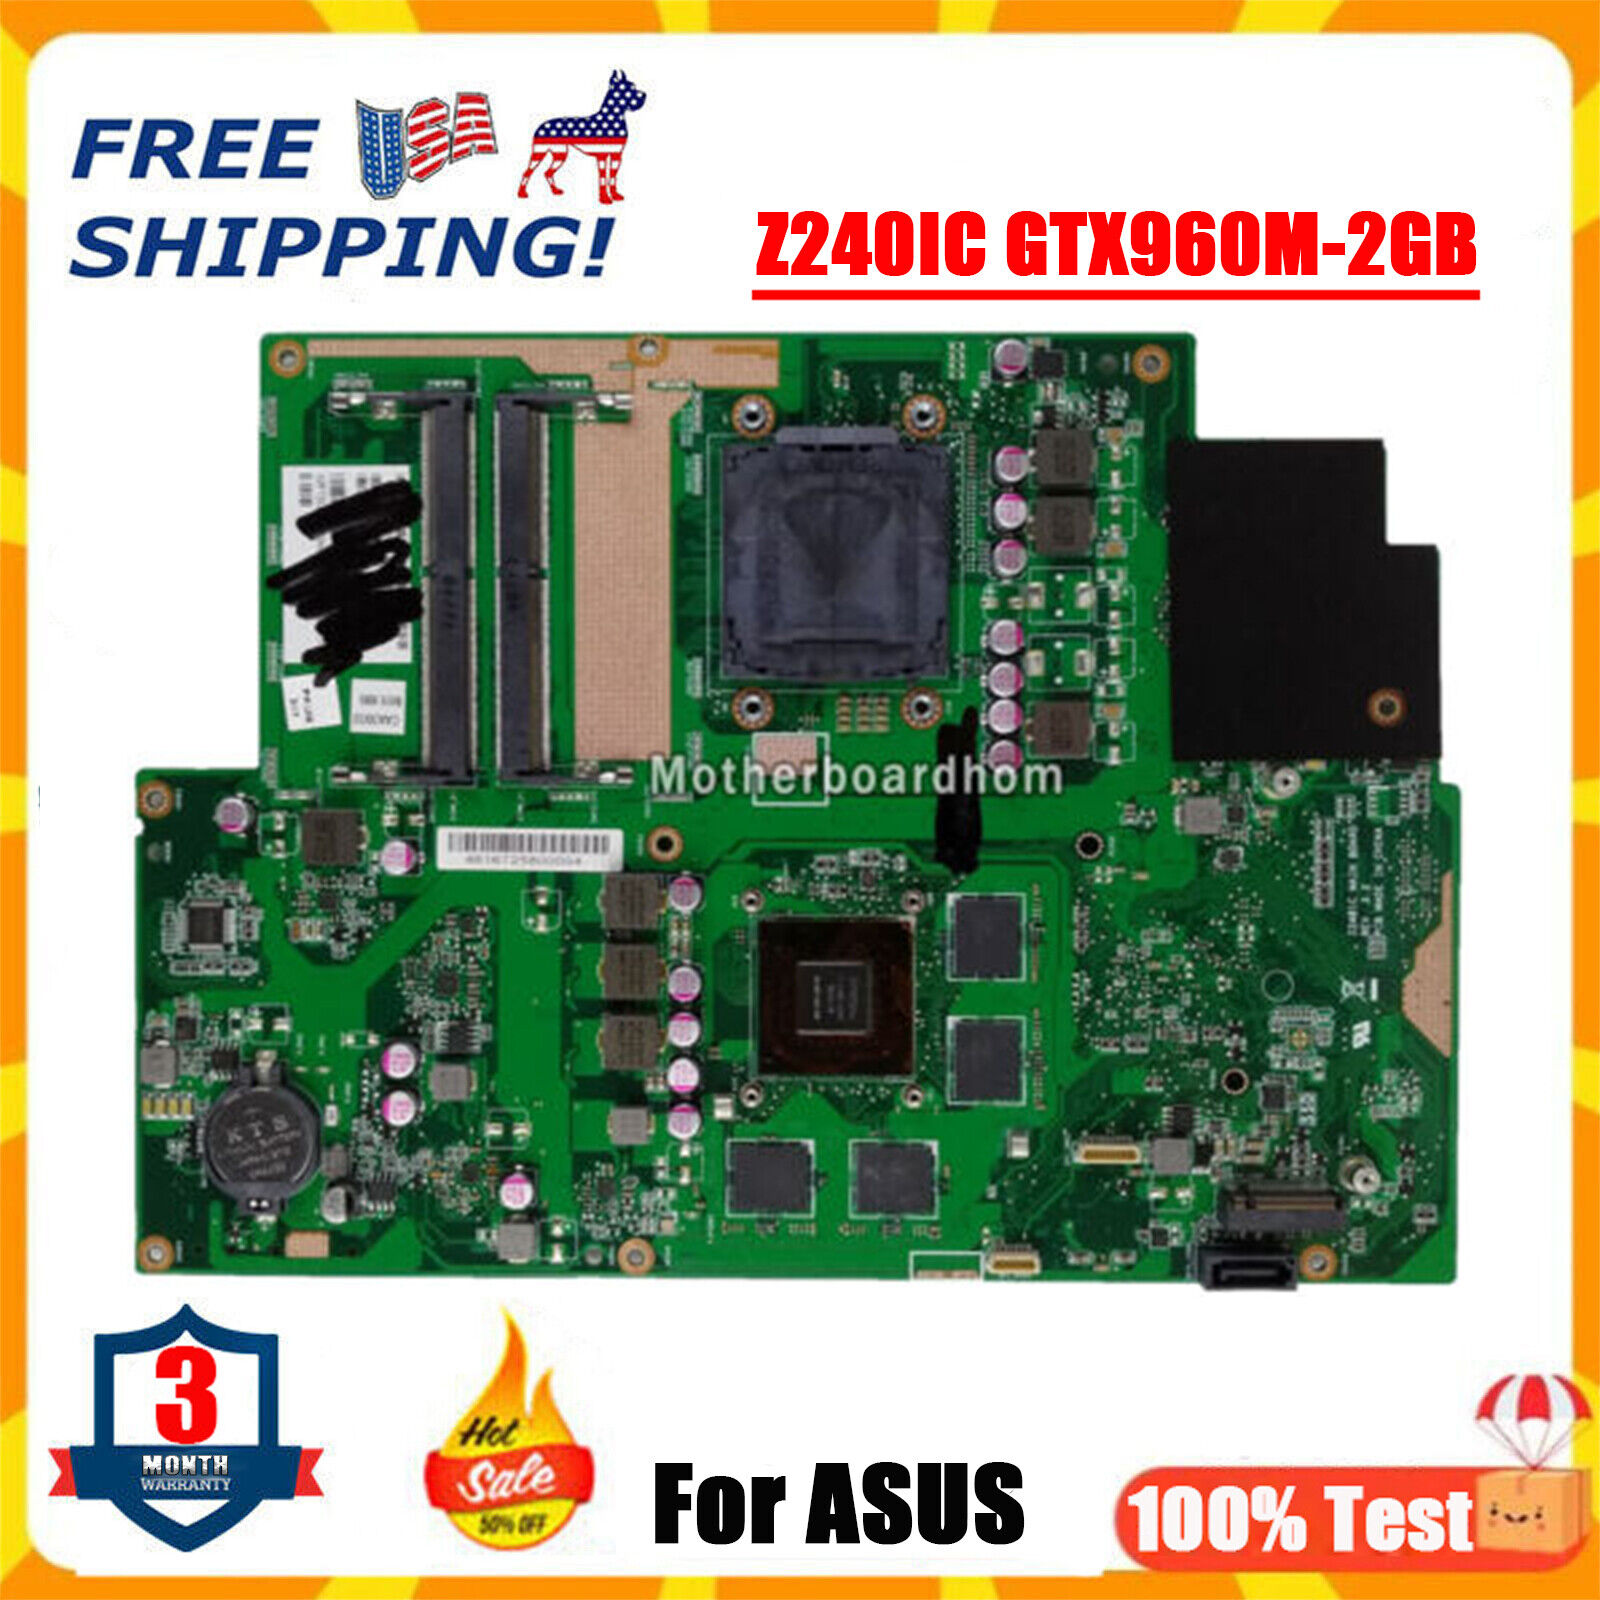 FOR ASUS ZEN AIO PRO Z240IC Z240ICGK MAINBOARD Z240IC MOTHERBOARD GTX960M-2GB